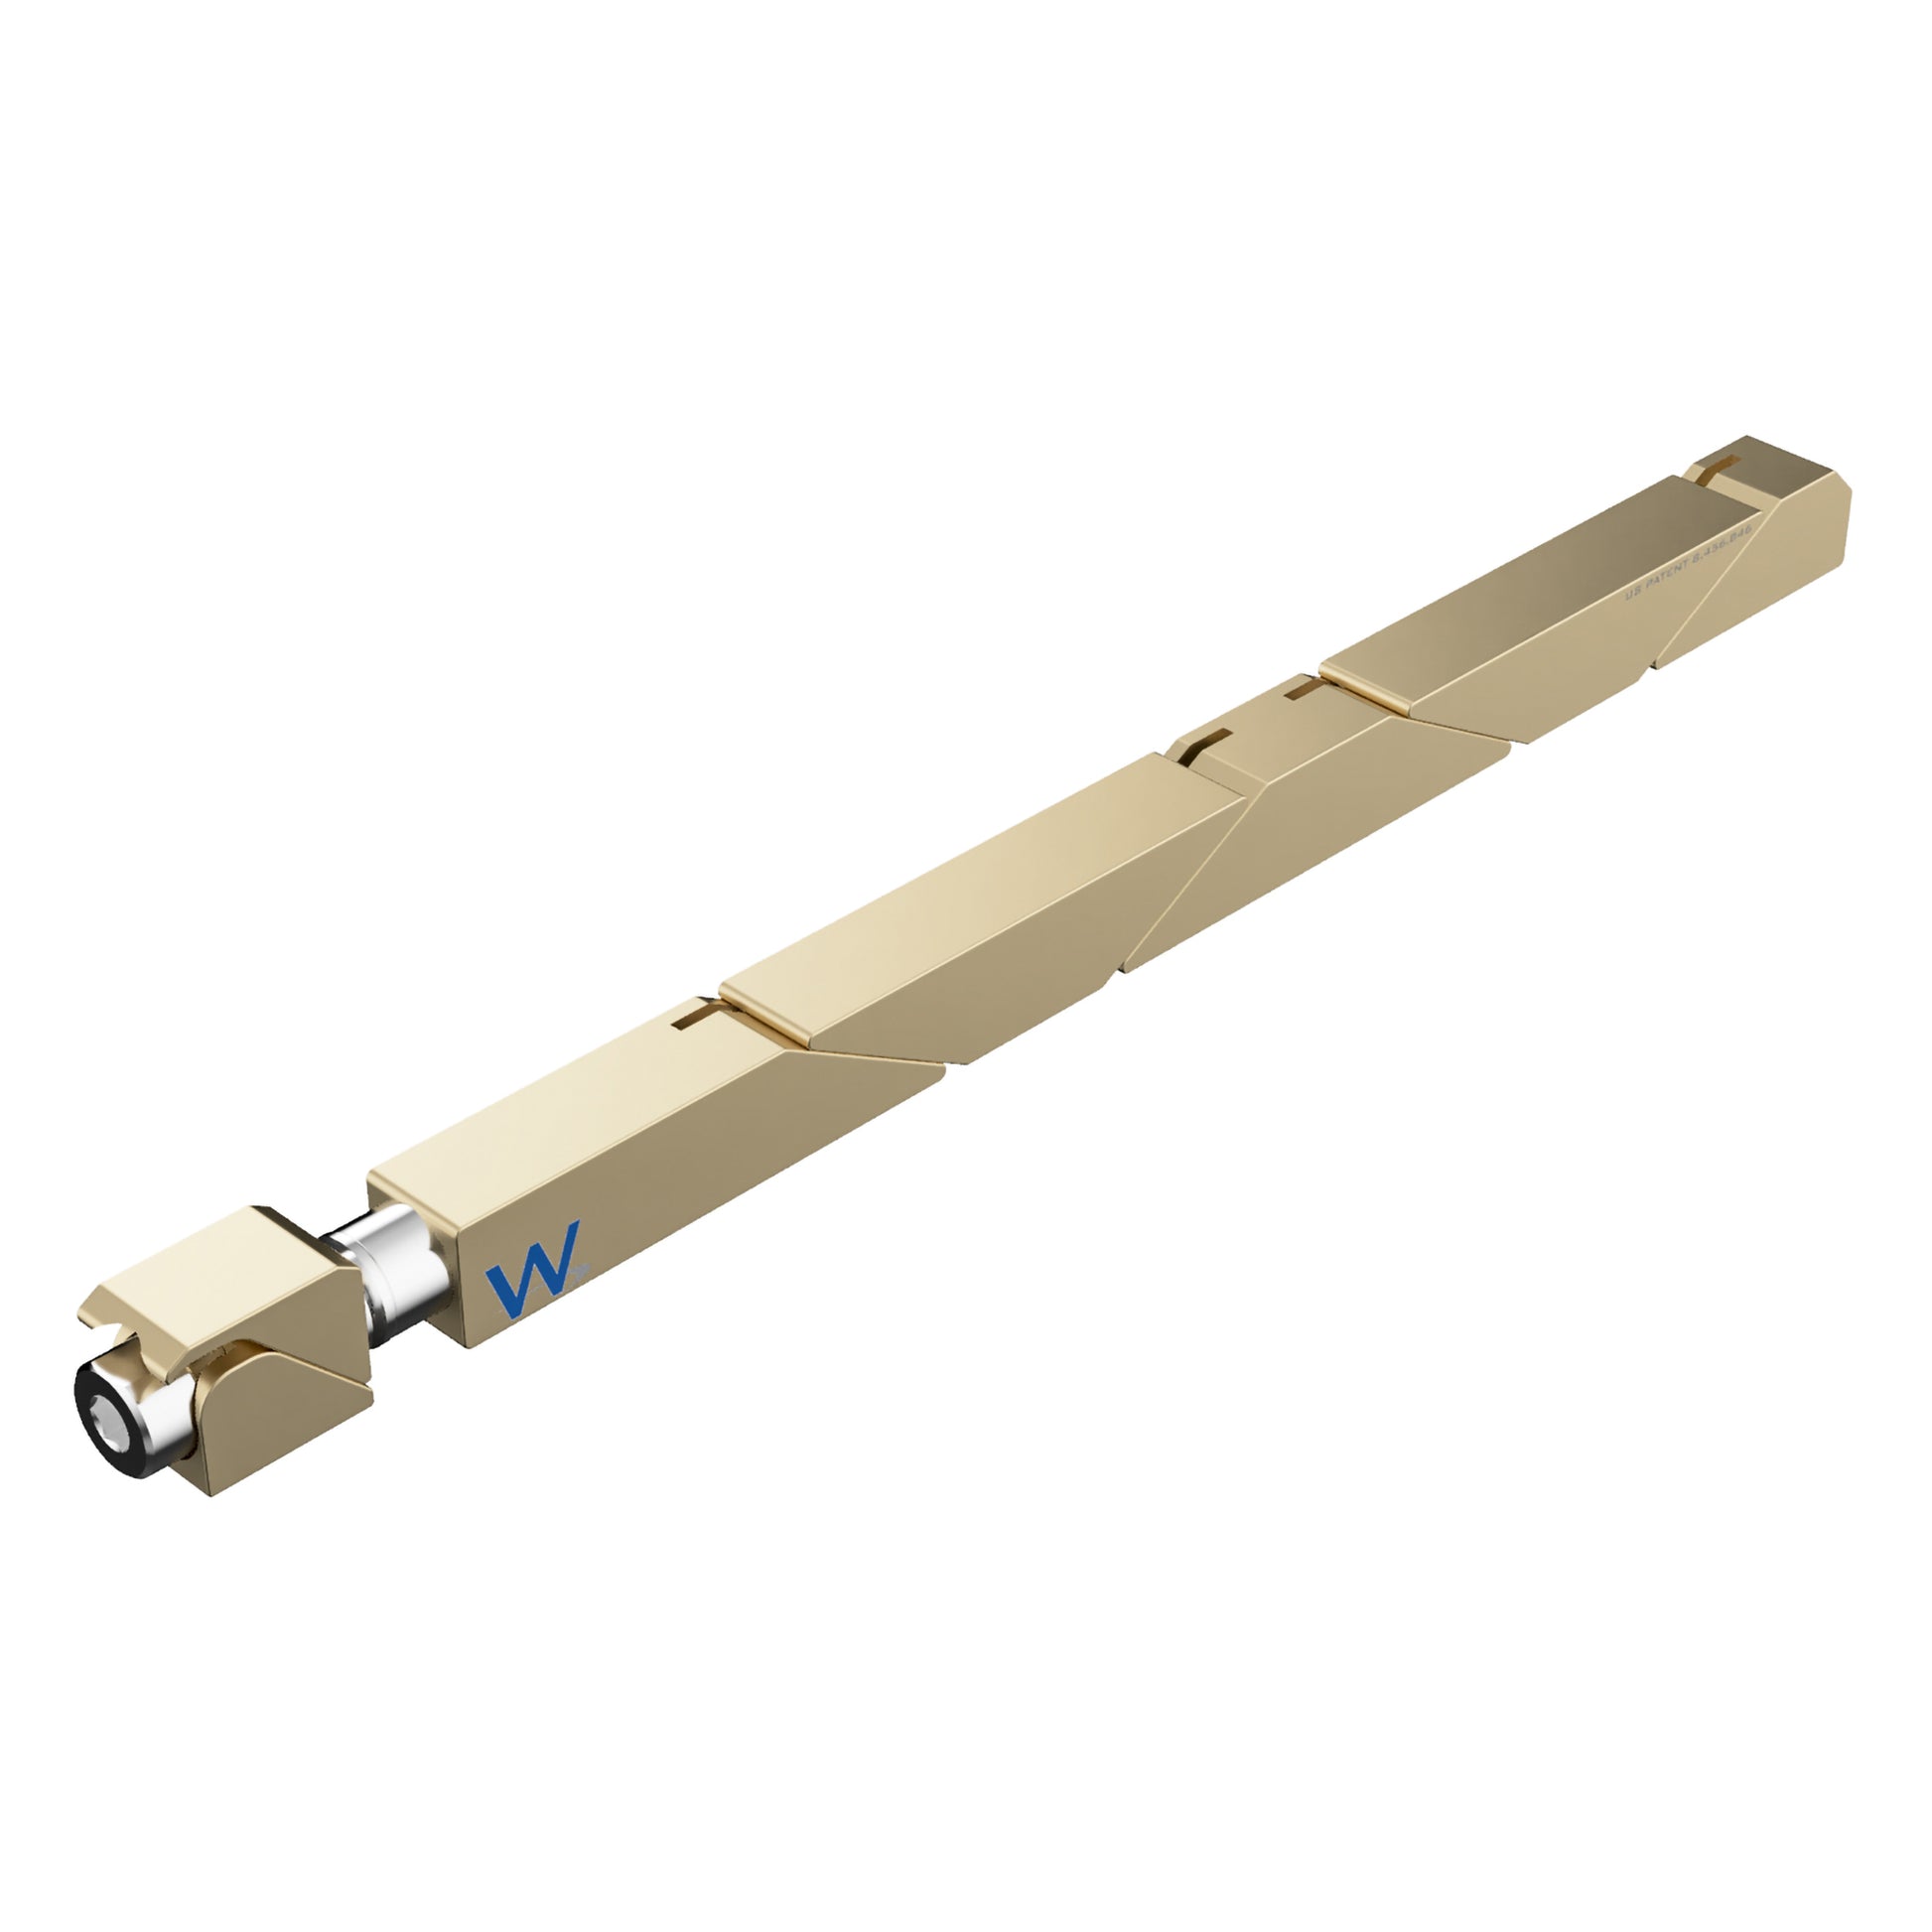 SW7-43-270-250 Max Force Belleville Wedgelock, segmented long rectulangular hardware component, Gold Chemical Film Finish